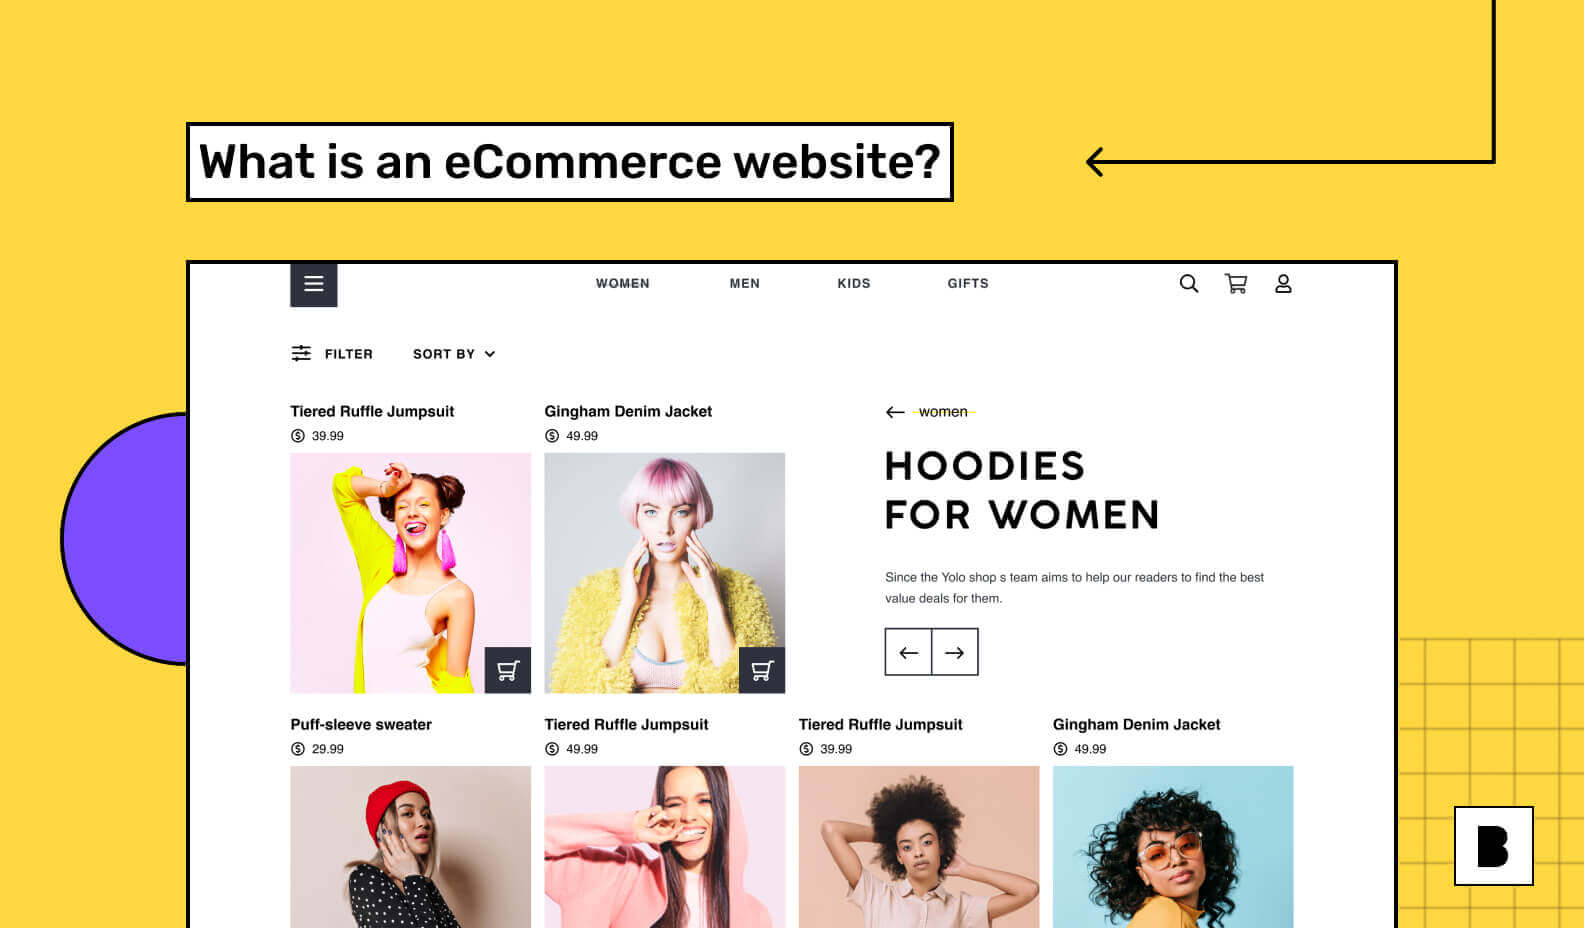 What is an eCommerce website?